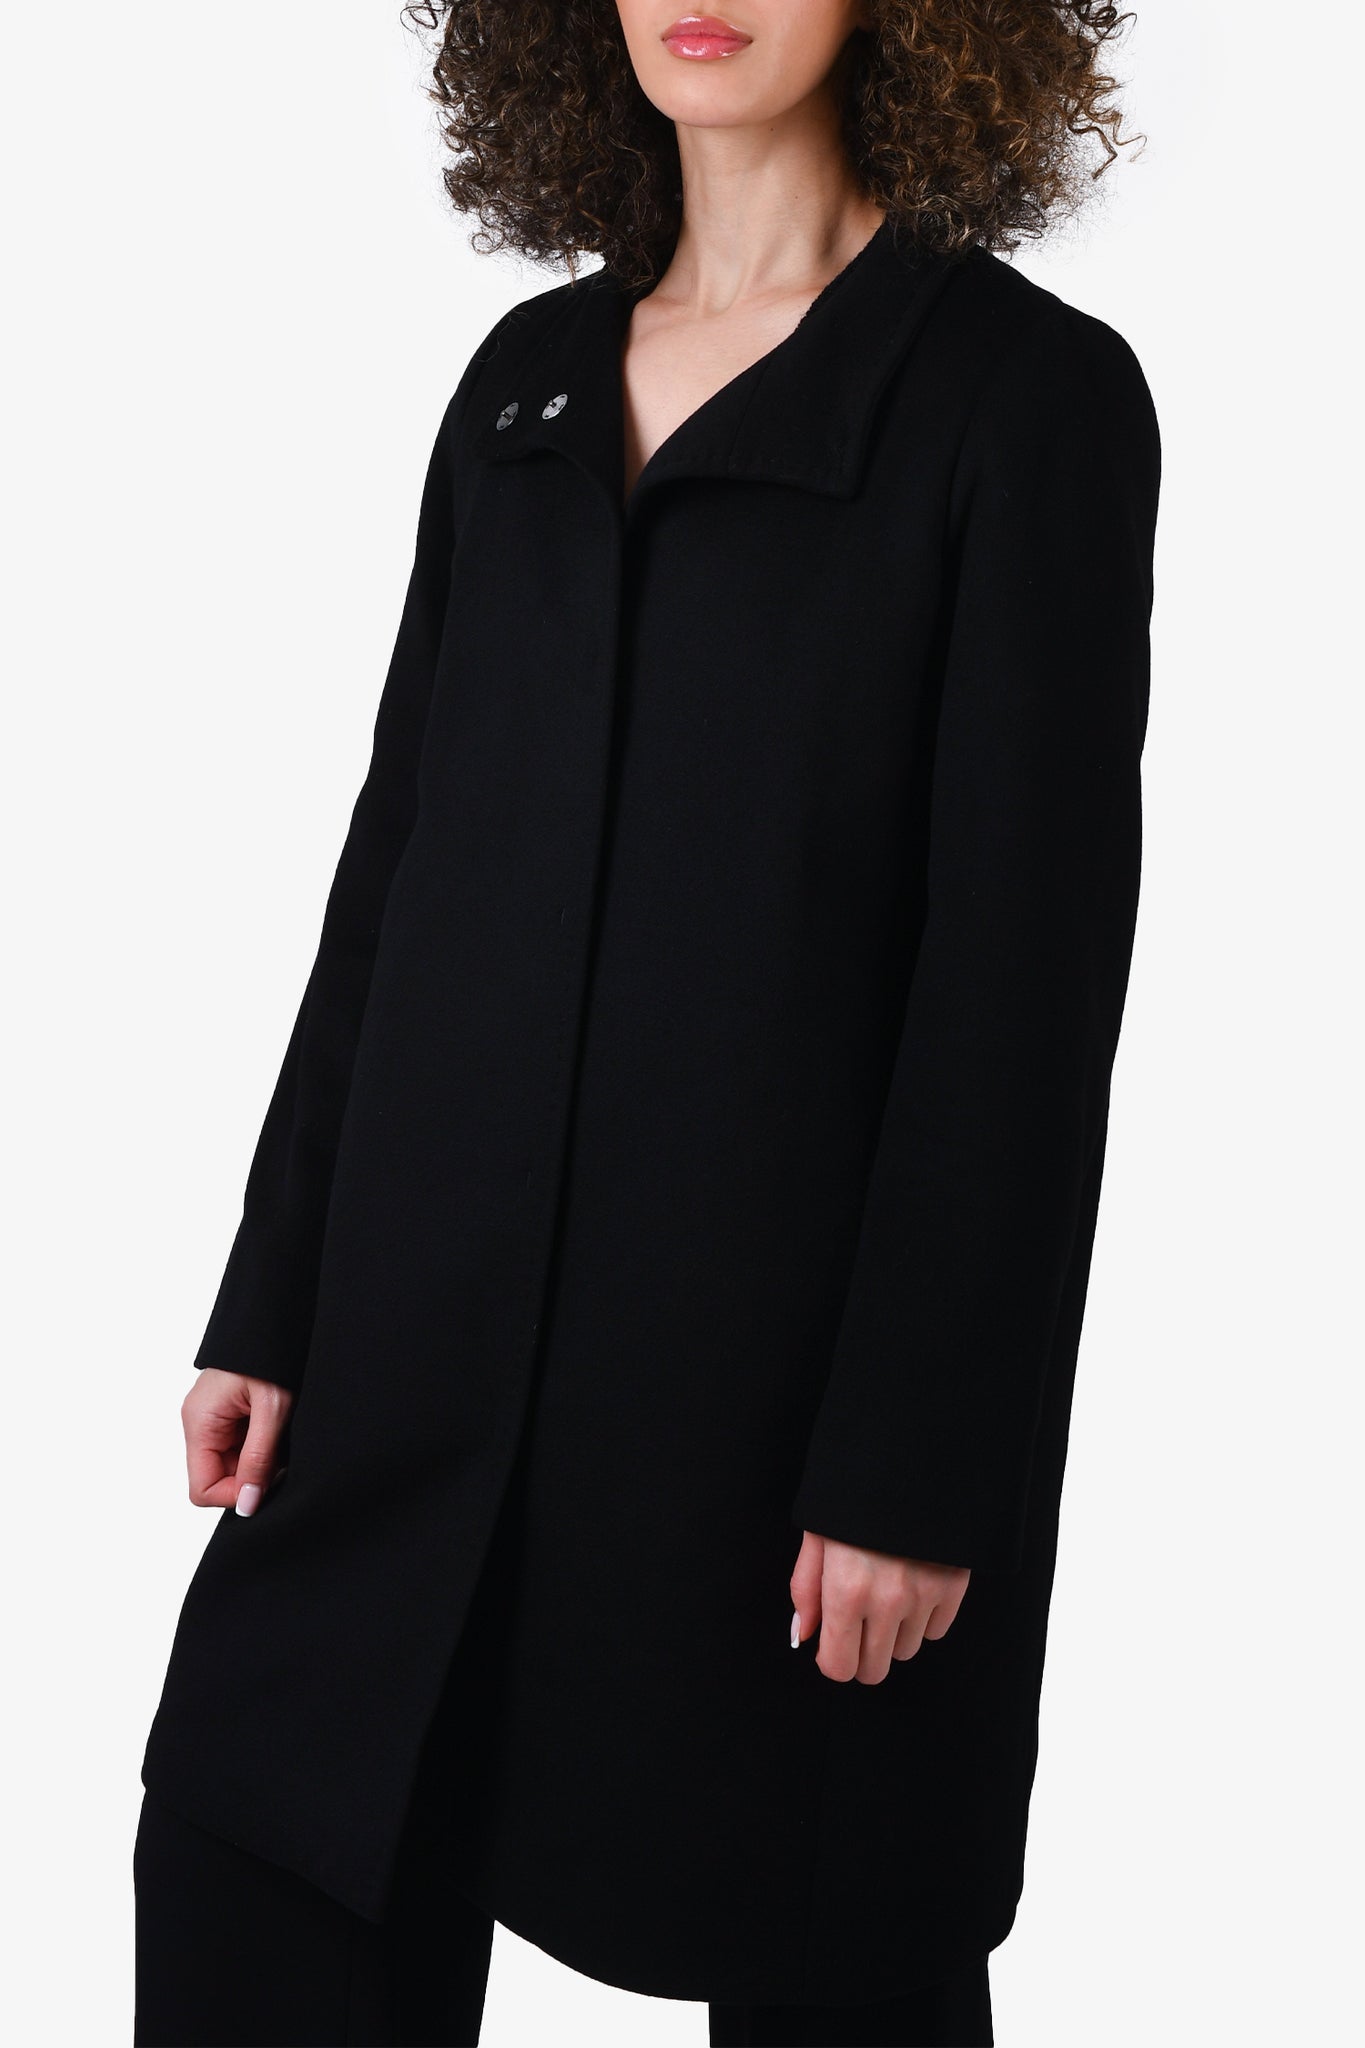 The Weekend Max Mara Black Cashmere Single Breasted Coat Size 10